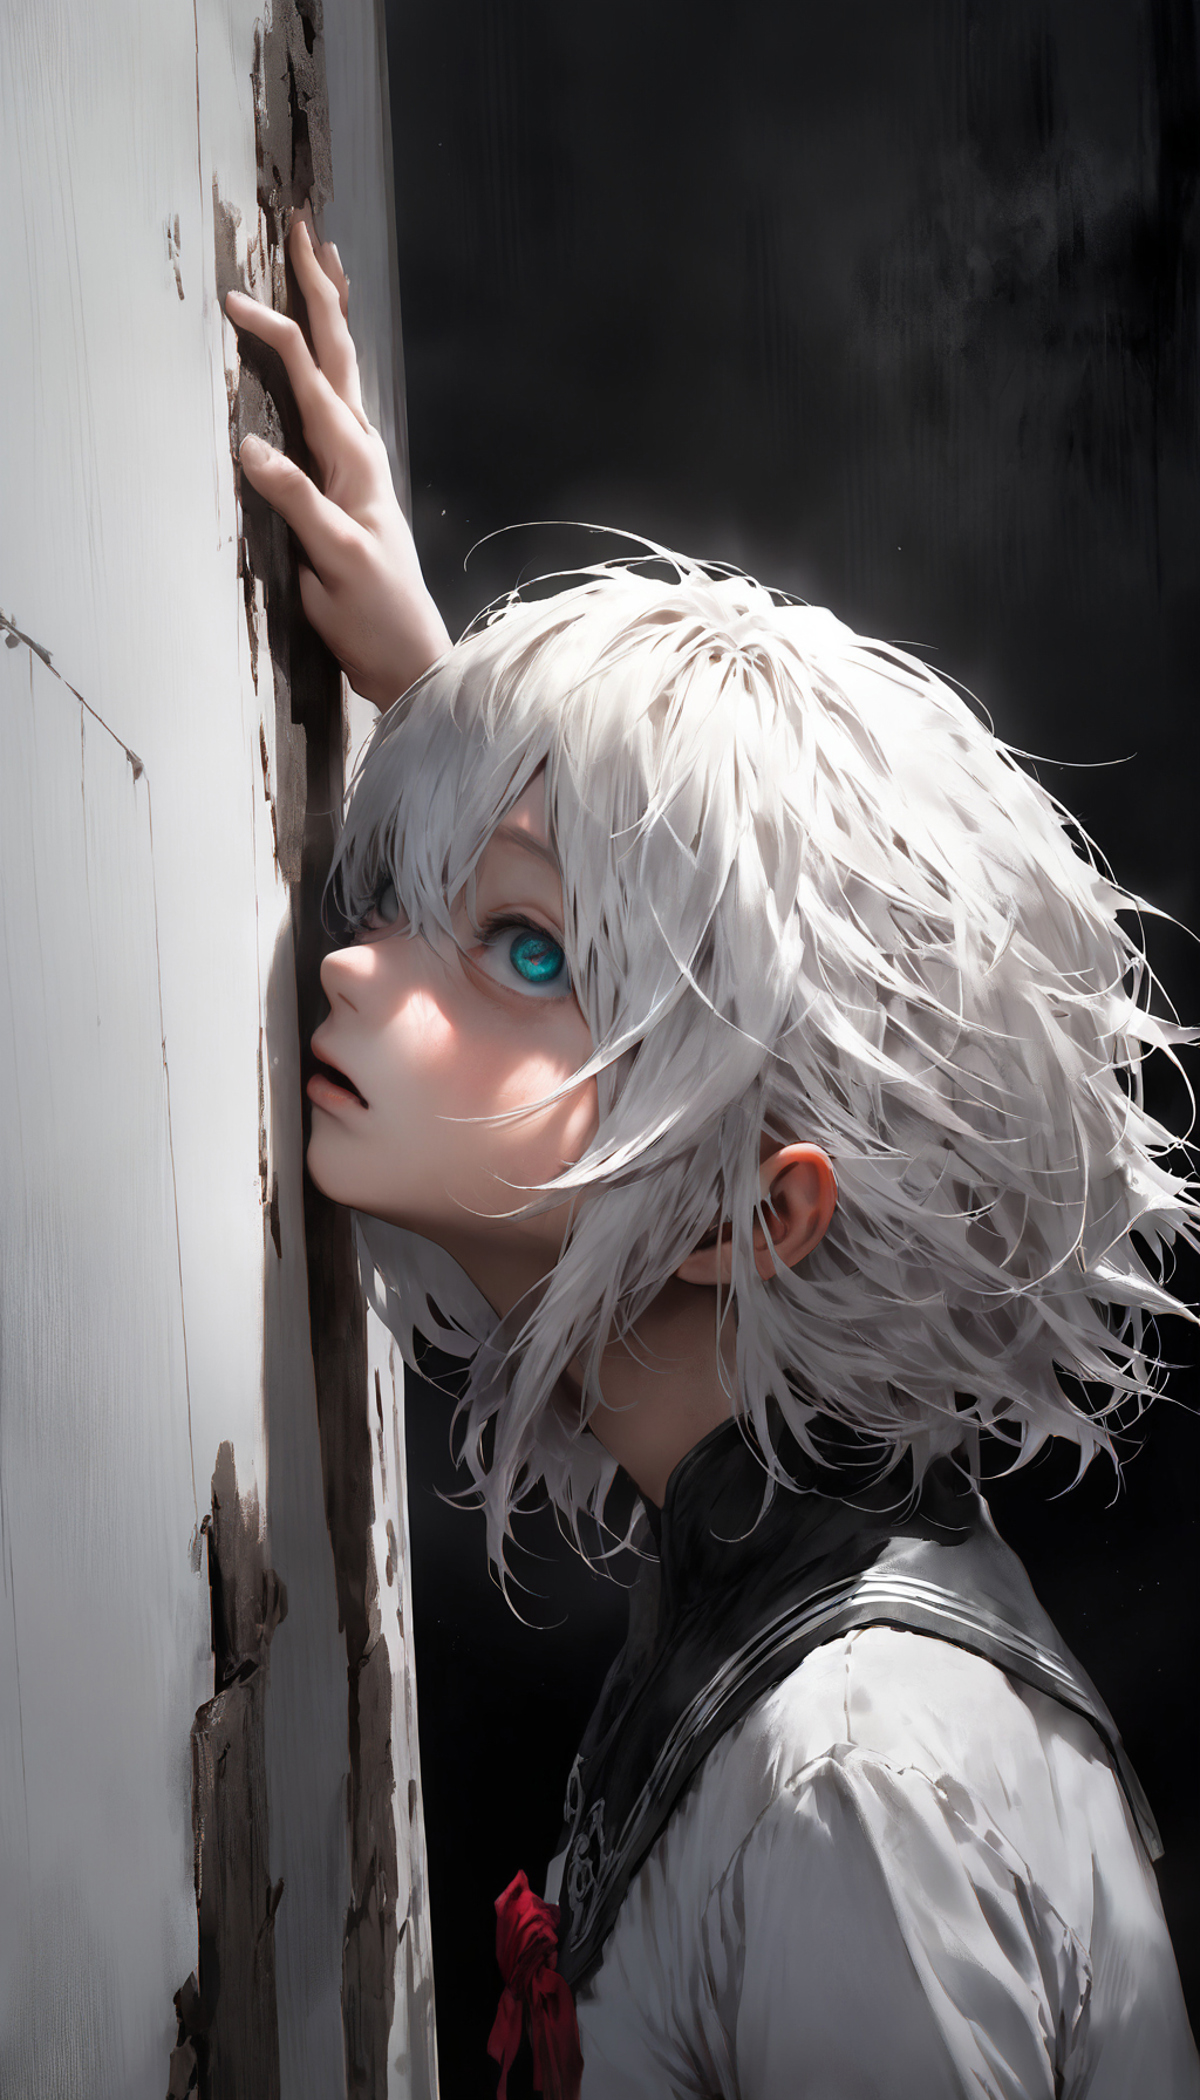 A young girl with white hair and blue eyes peers around a corner.